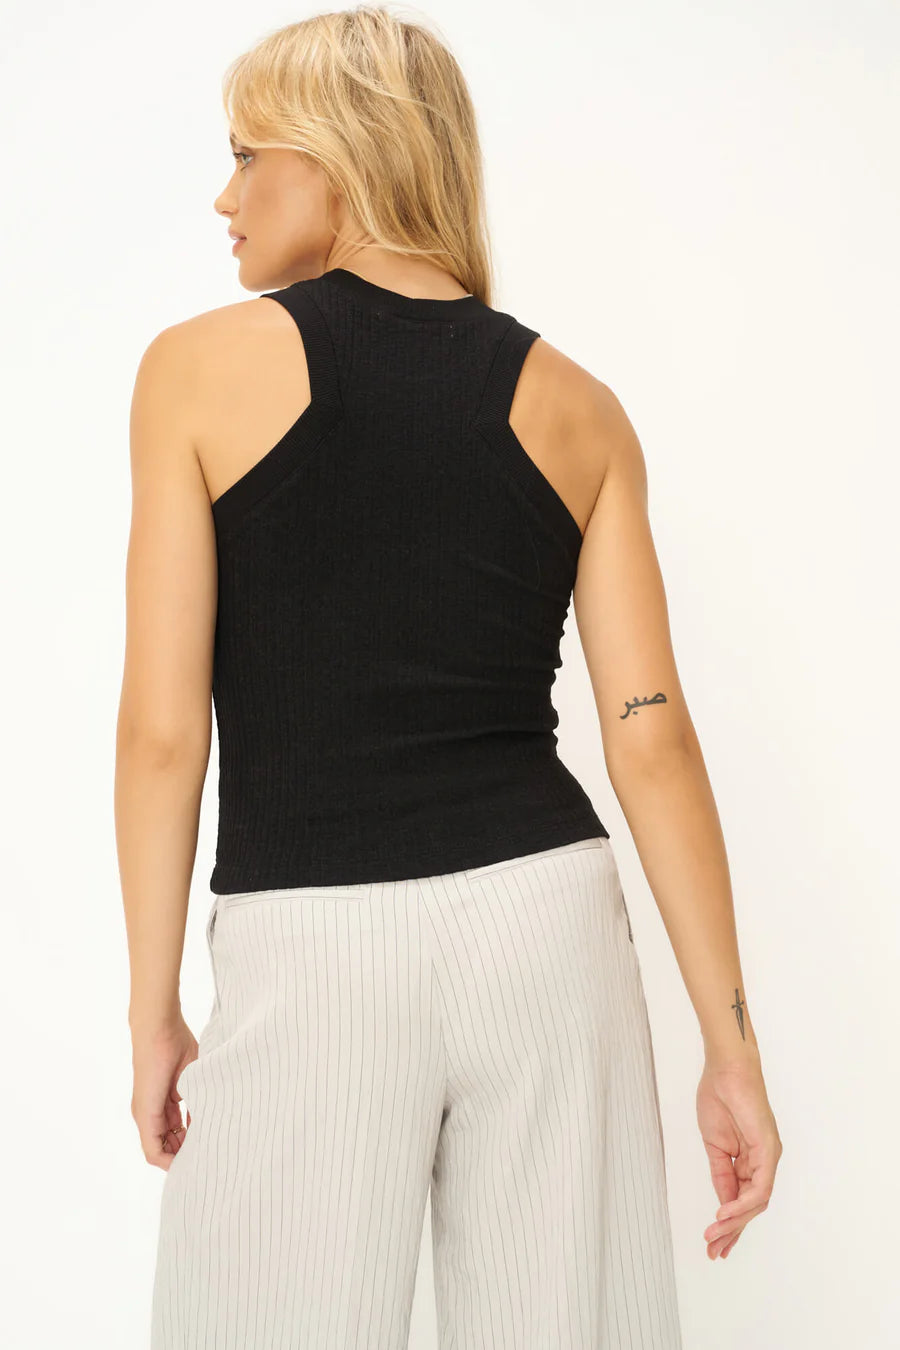 The PLAYER FITTED Racerback Rib Tank